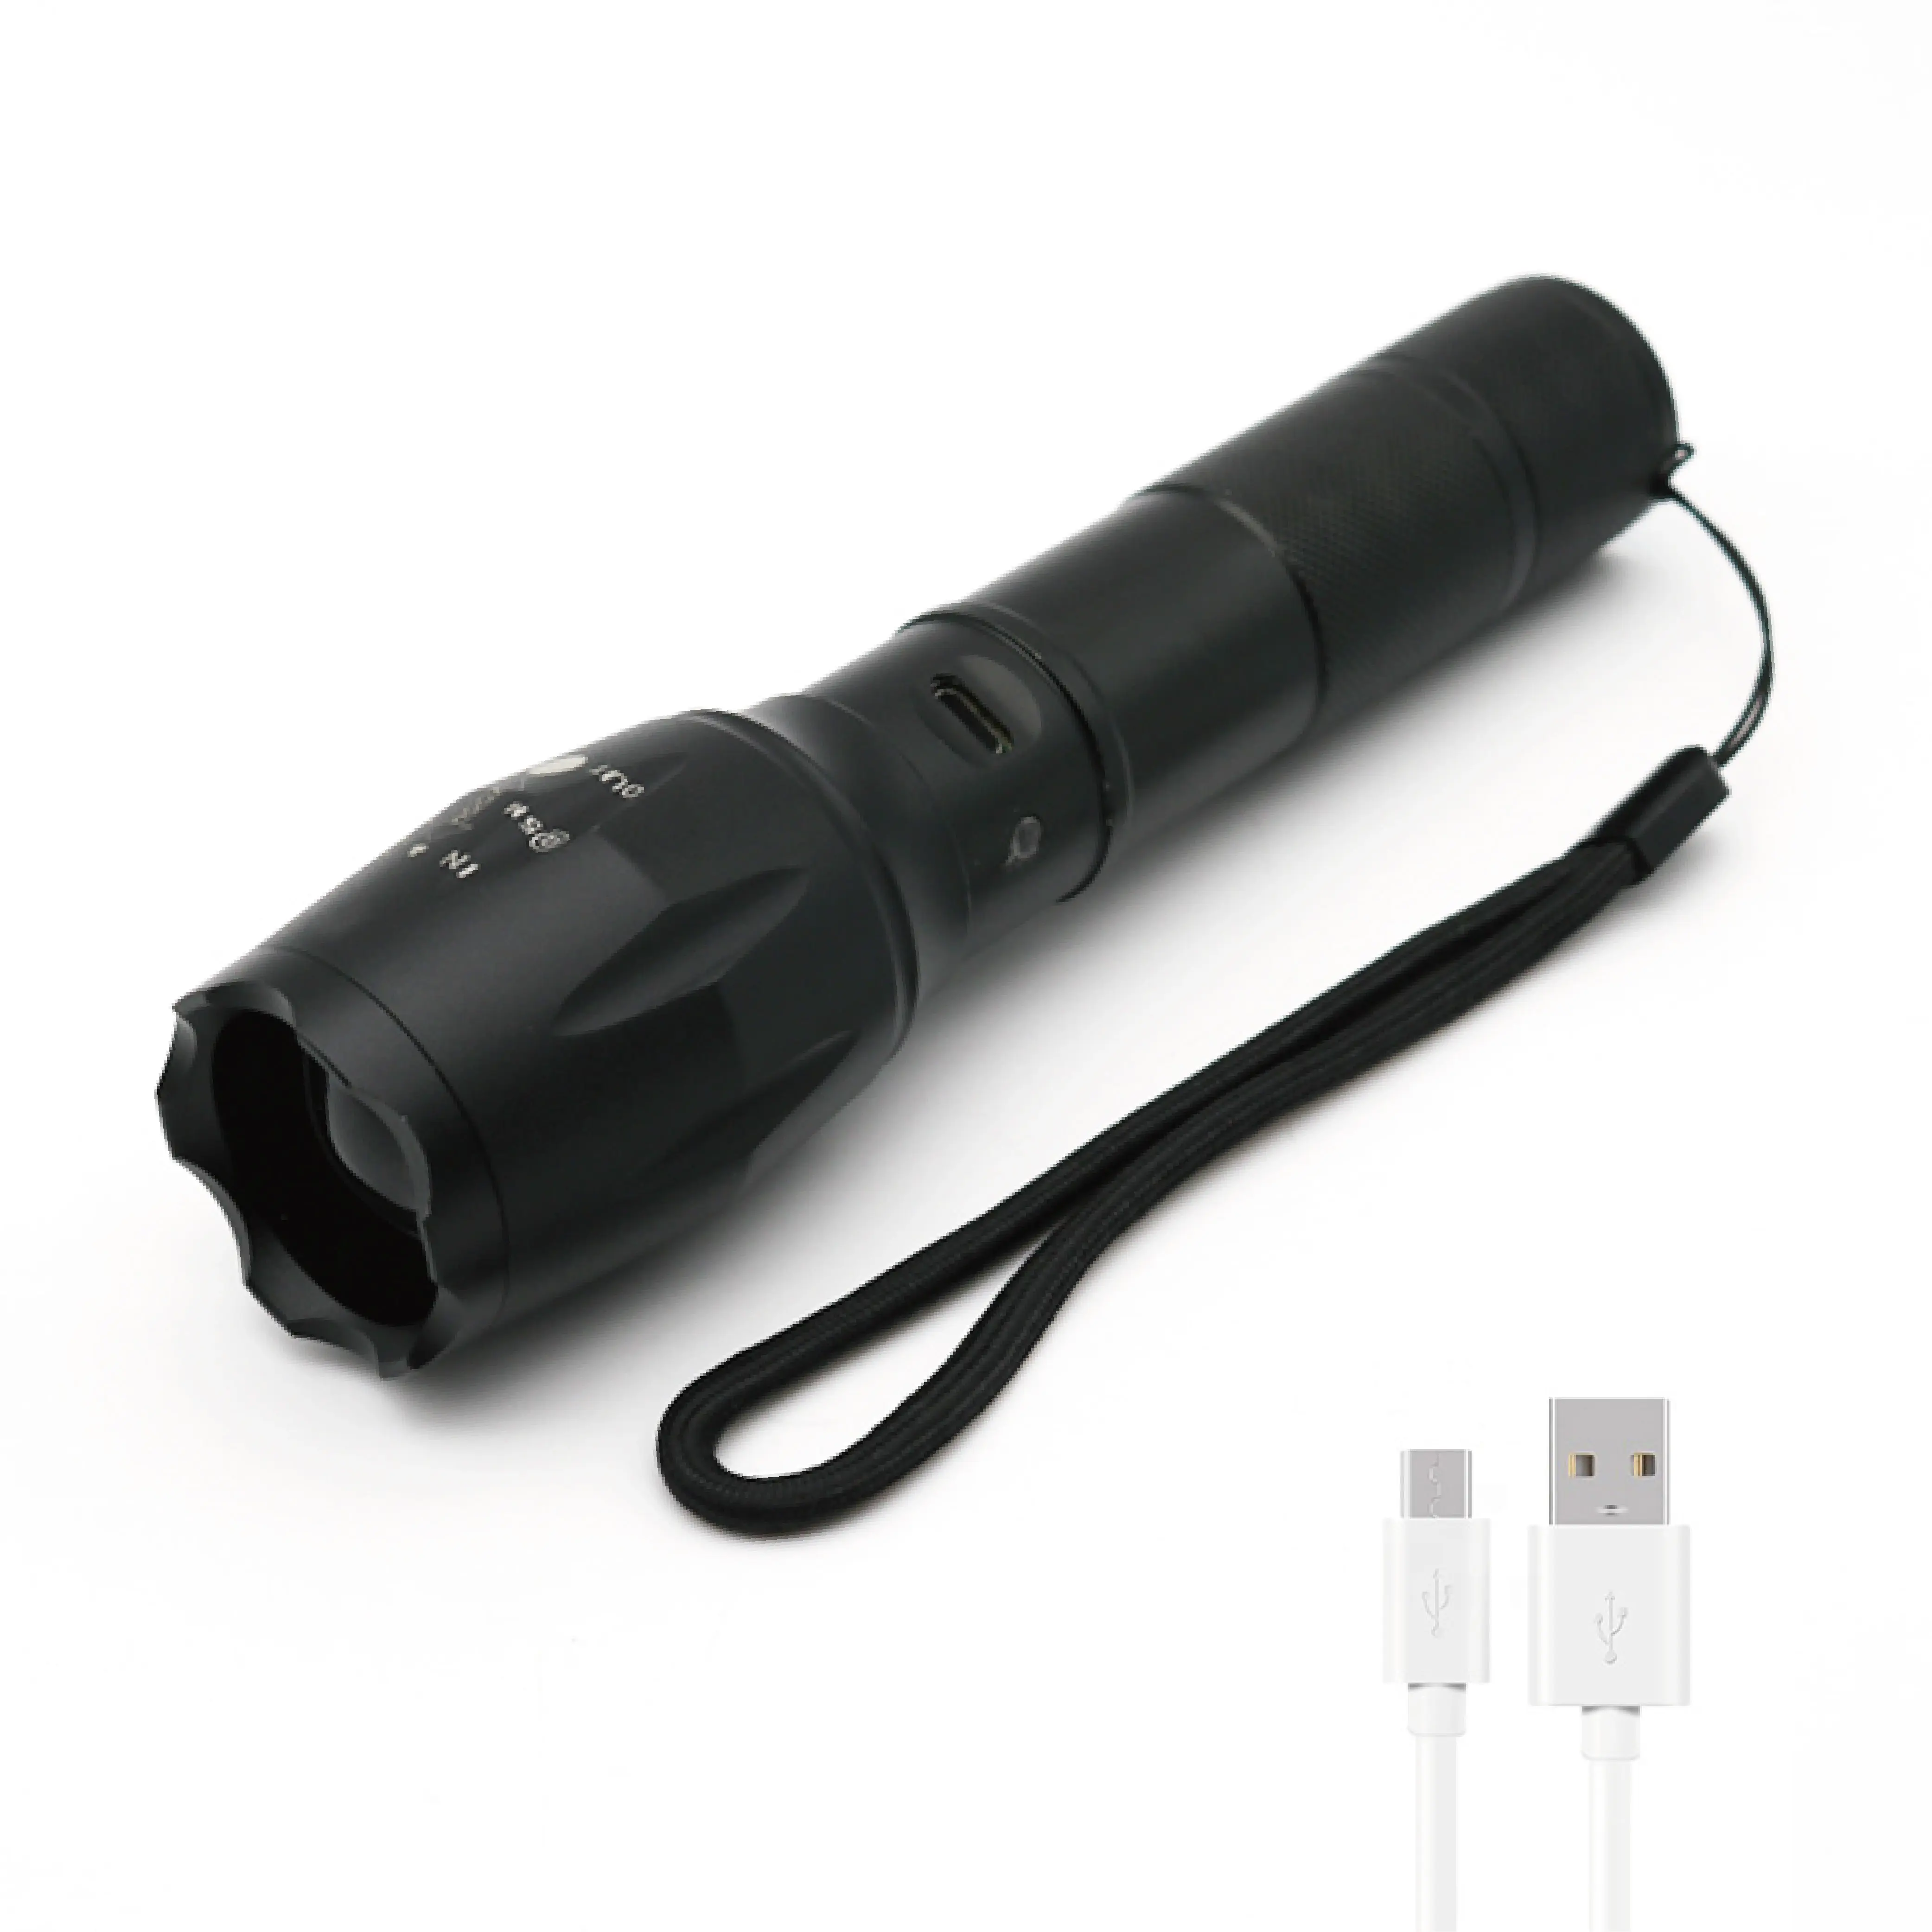 Xml T6 Aluminum Alloy 10w LED Torch tactical Flashlight torch usb rechargeable multi-function